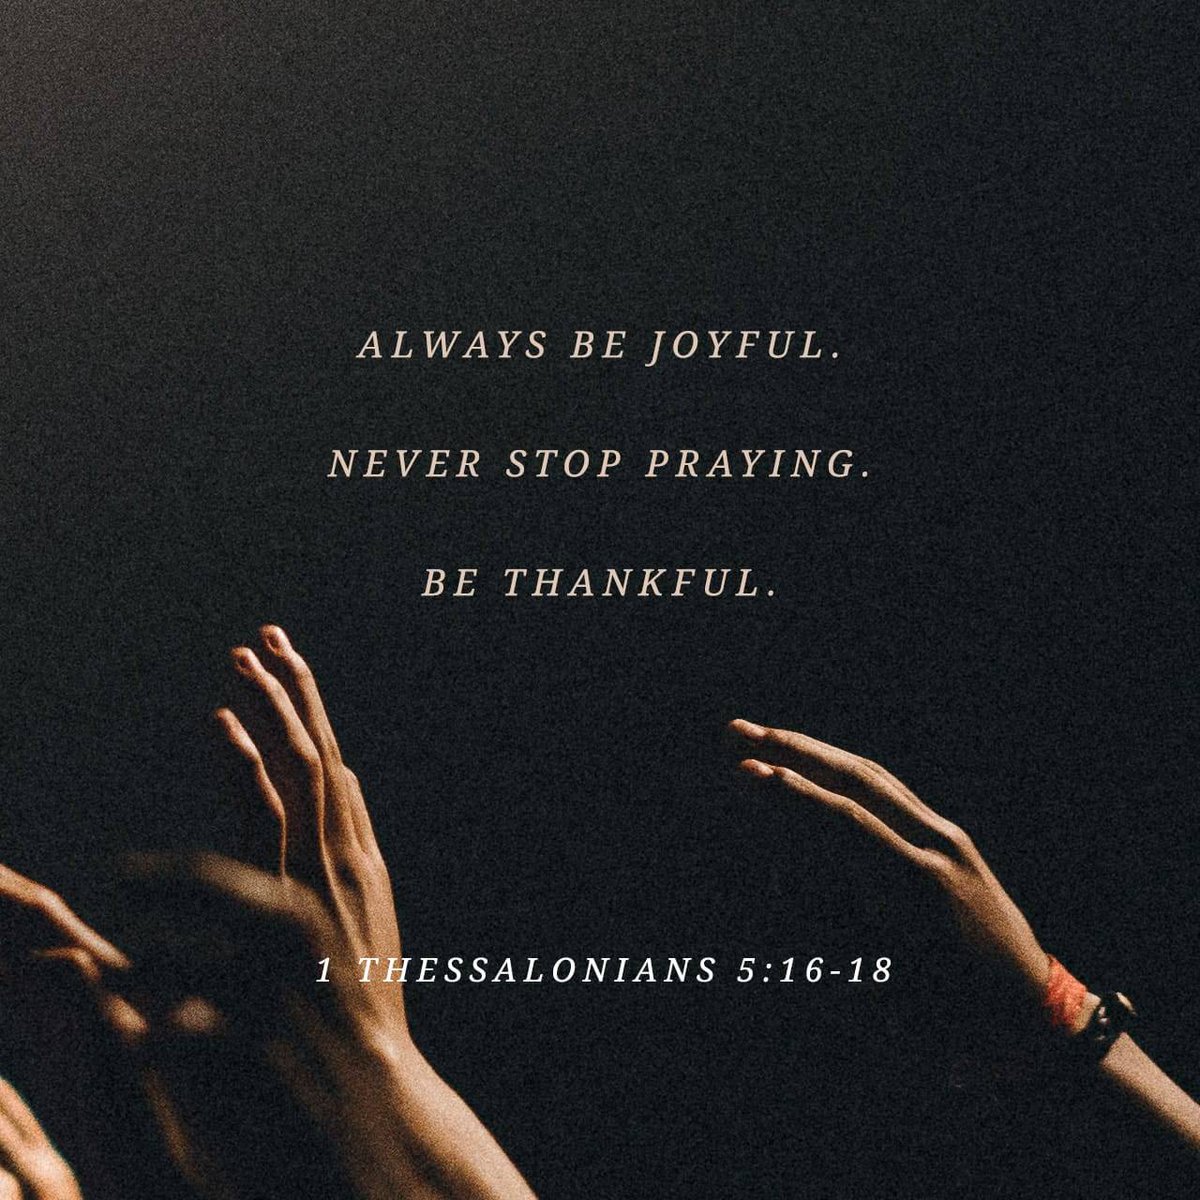 1 Thessalonians 5:18 KJV 'In every thing give thanks: for this is the will of God in Christ Jesus concerning you.'